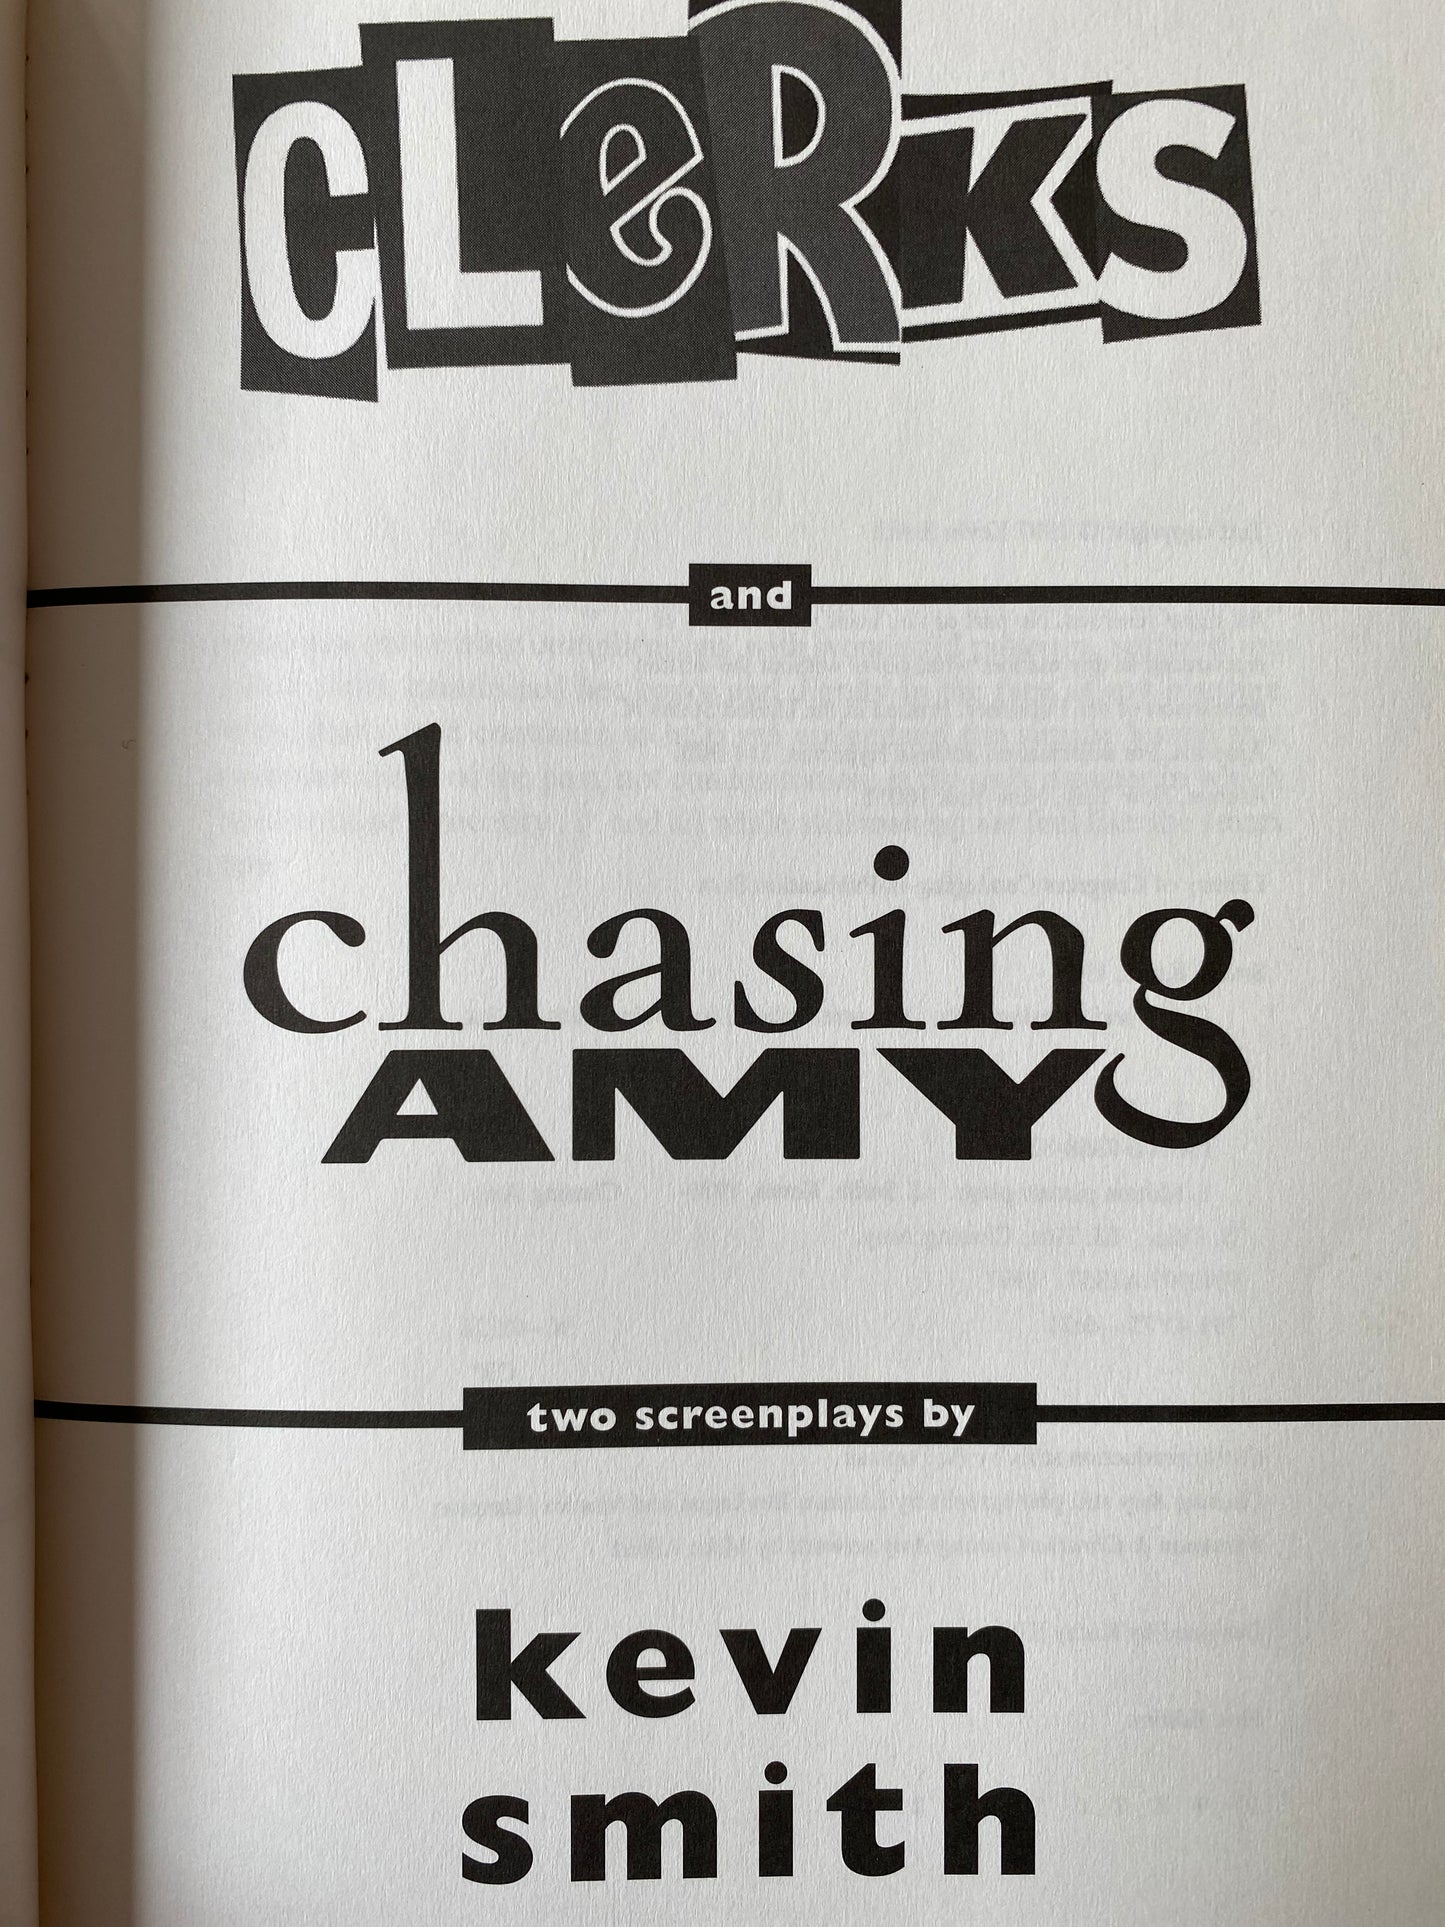 Kevin Smith - Two Screenplays: Clerks, Chasing Amy (1997)